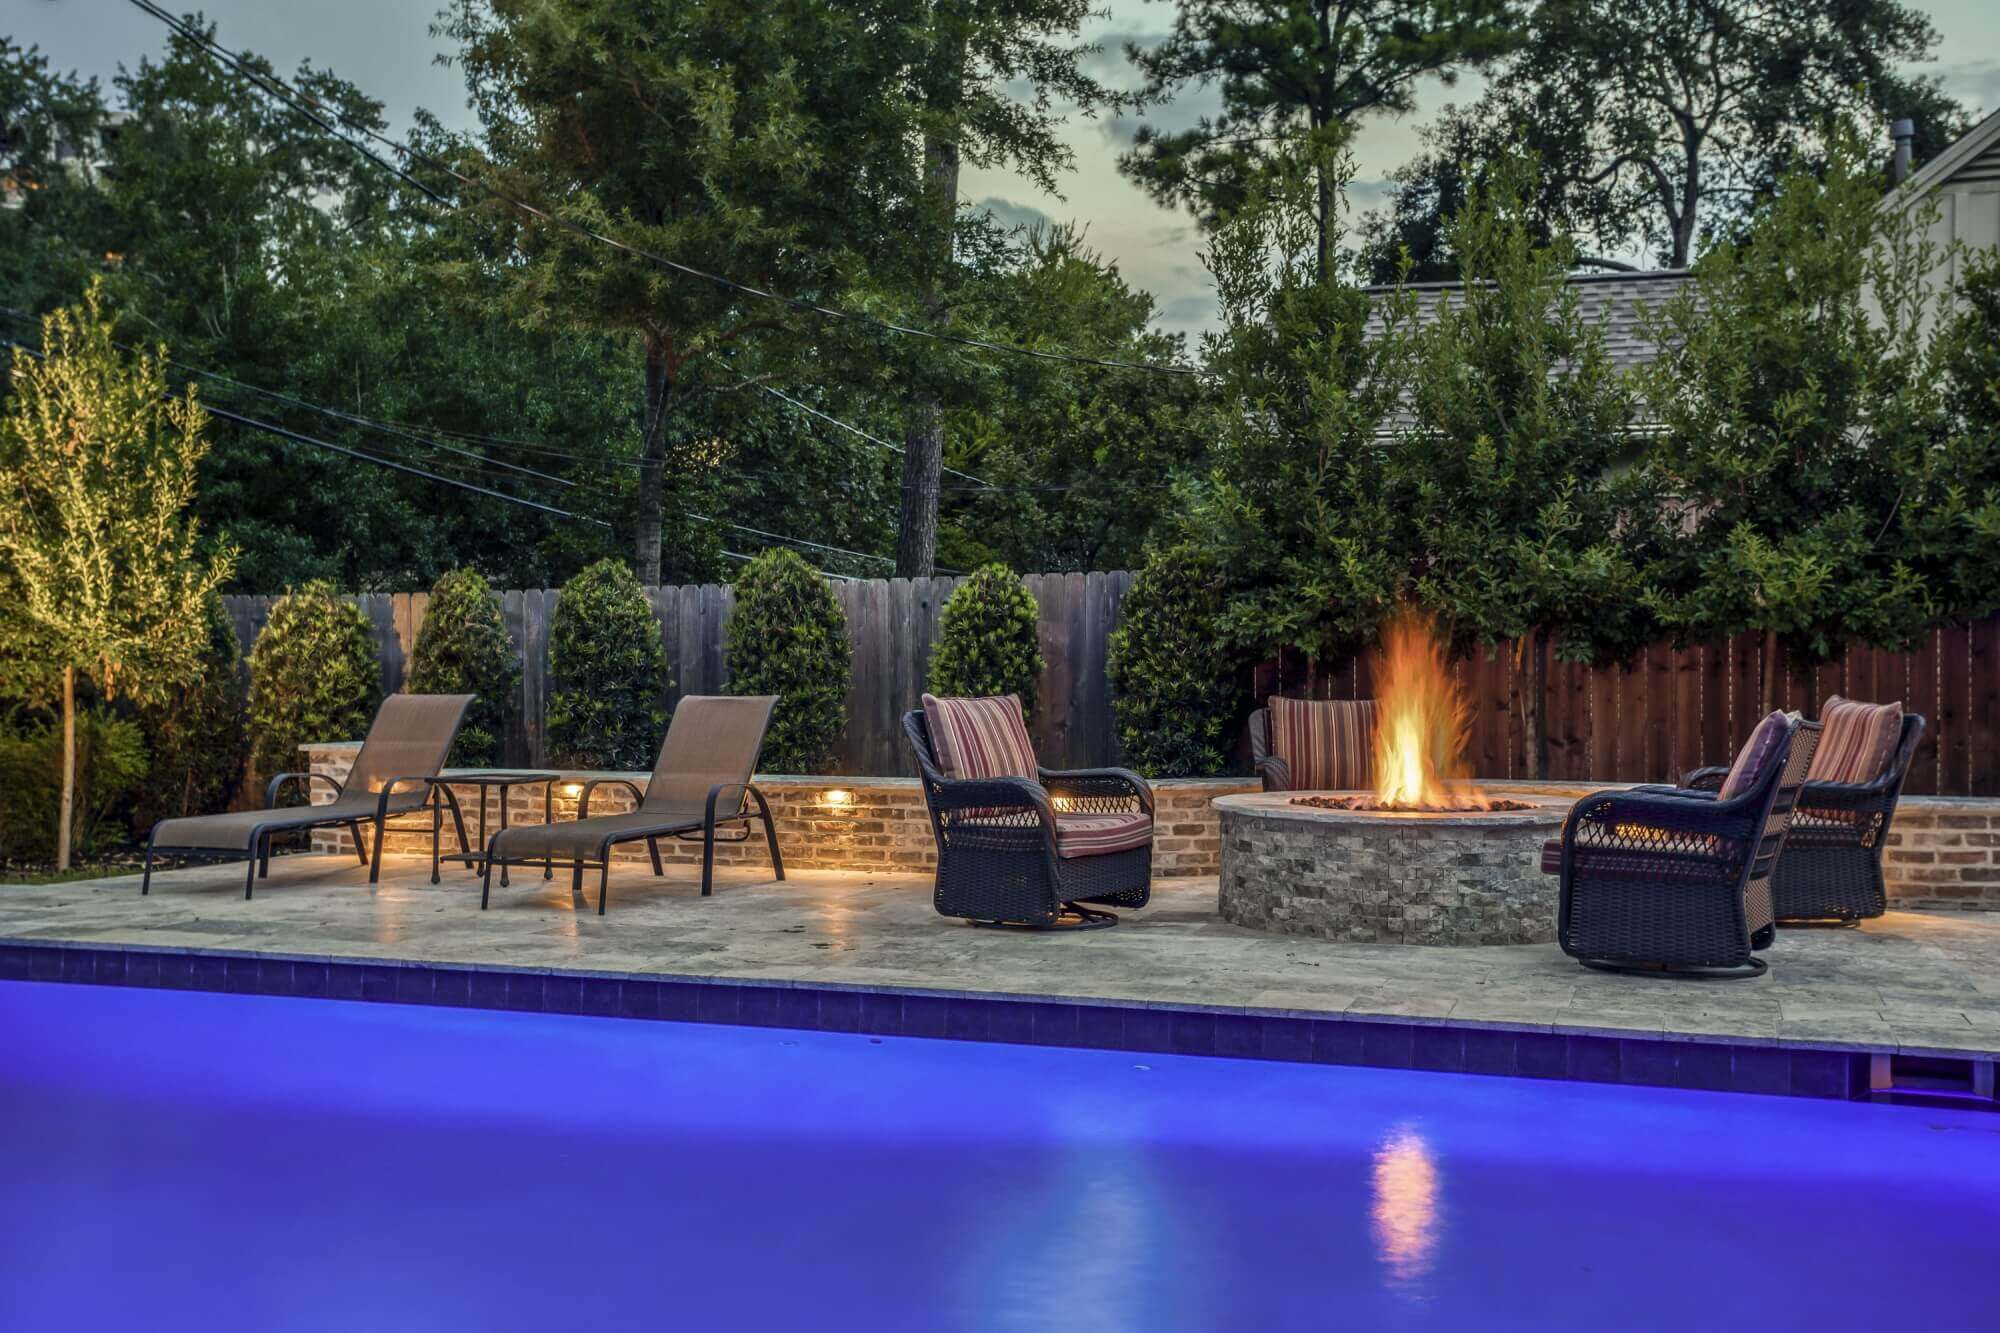 Custom pool build and firepit seating area